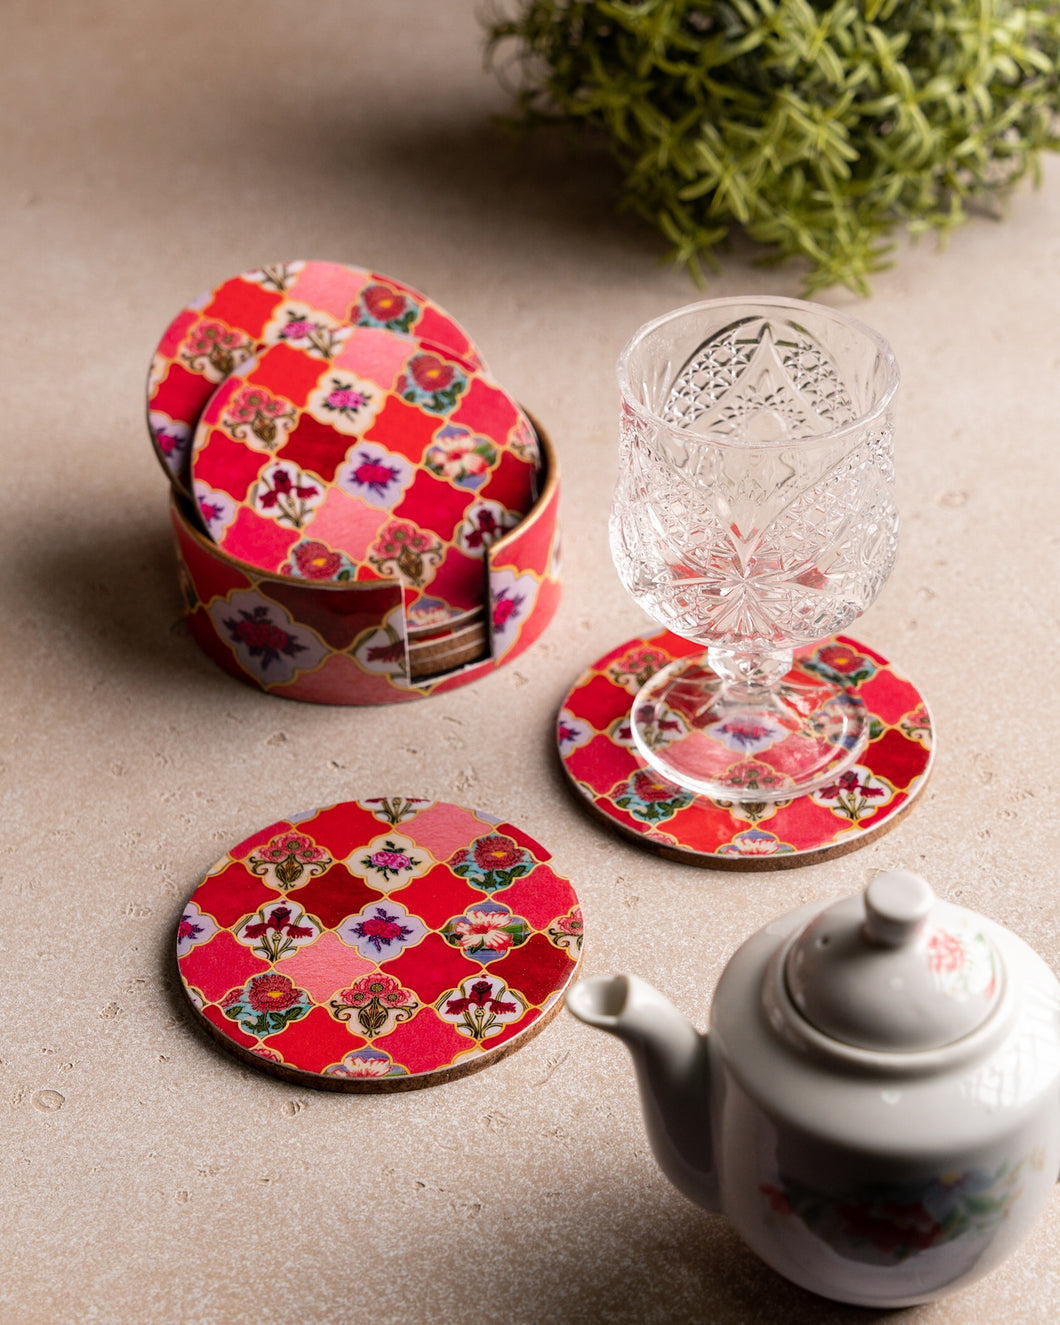 The Scarlet Set of 6 Coasters